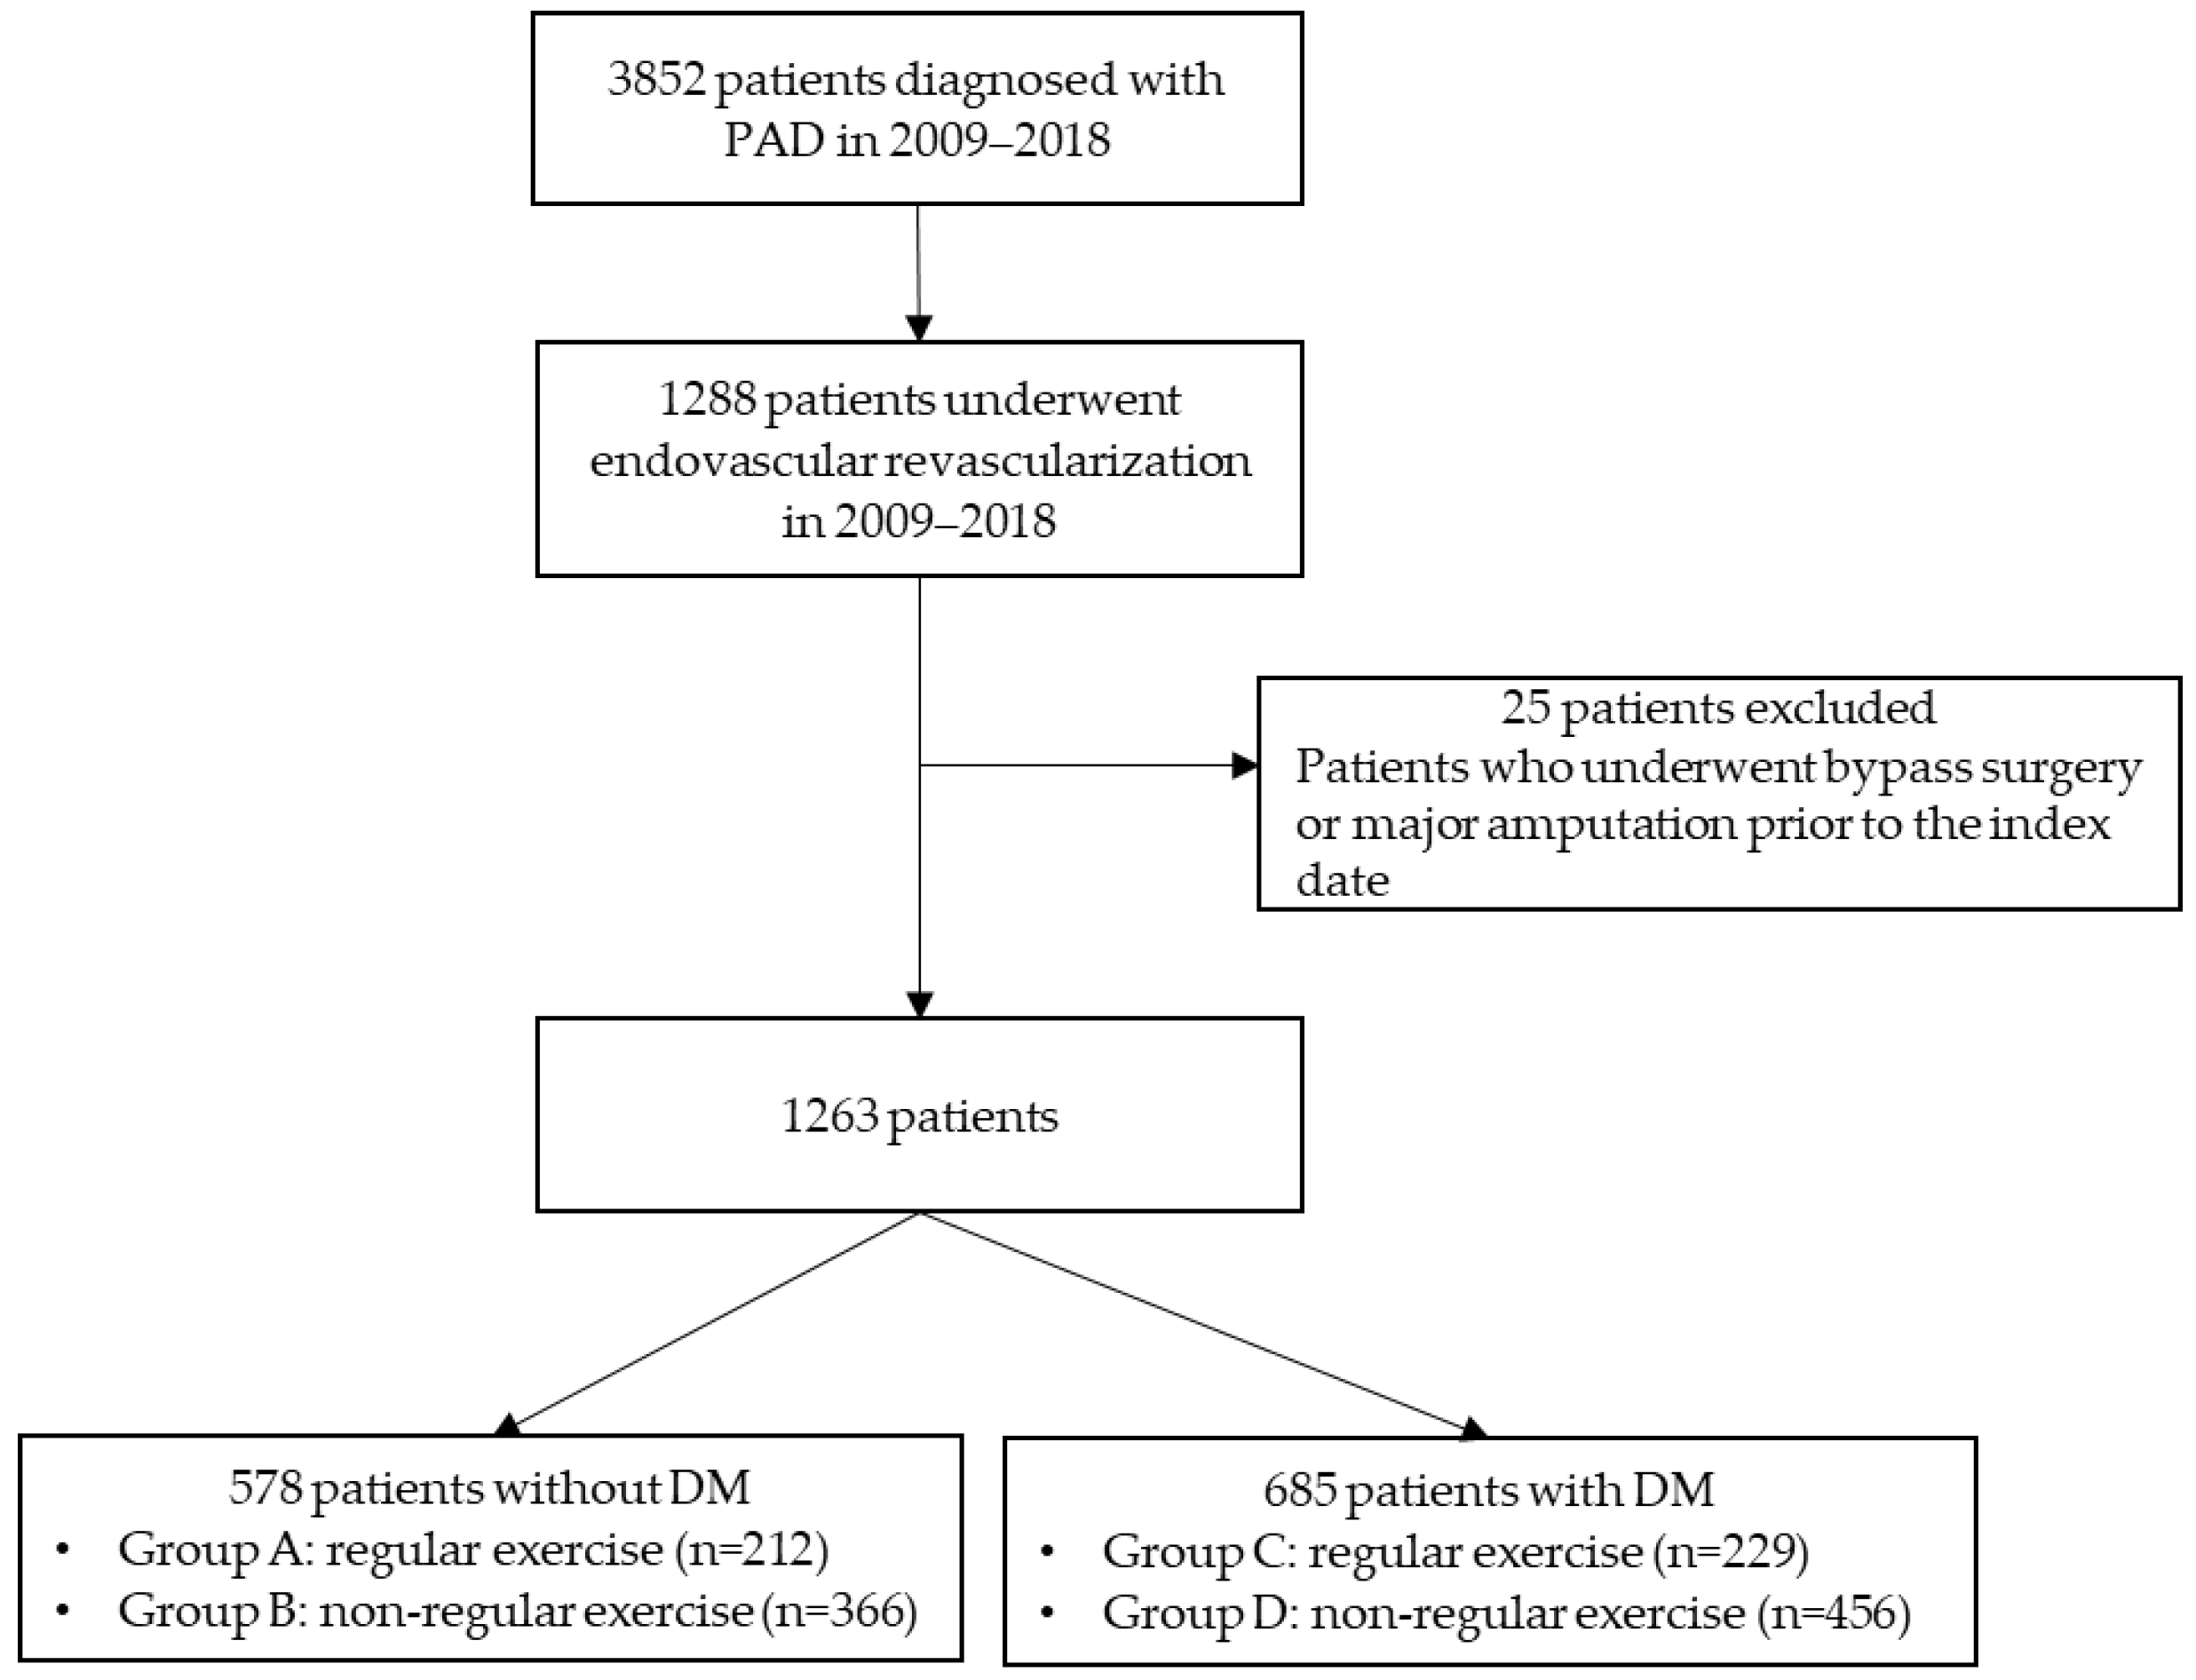 JCM | Free Full-Text | Major Adverse Events in Patients with Peripheral  Artery Disease after Endovascular Revascularization: A Retrospective Study  | HTML